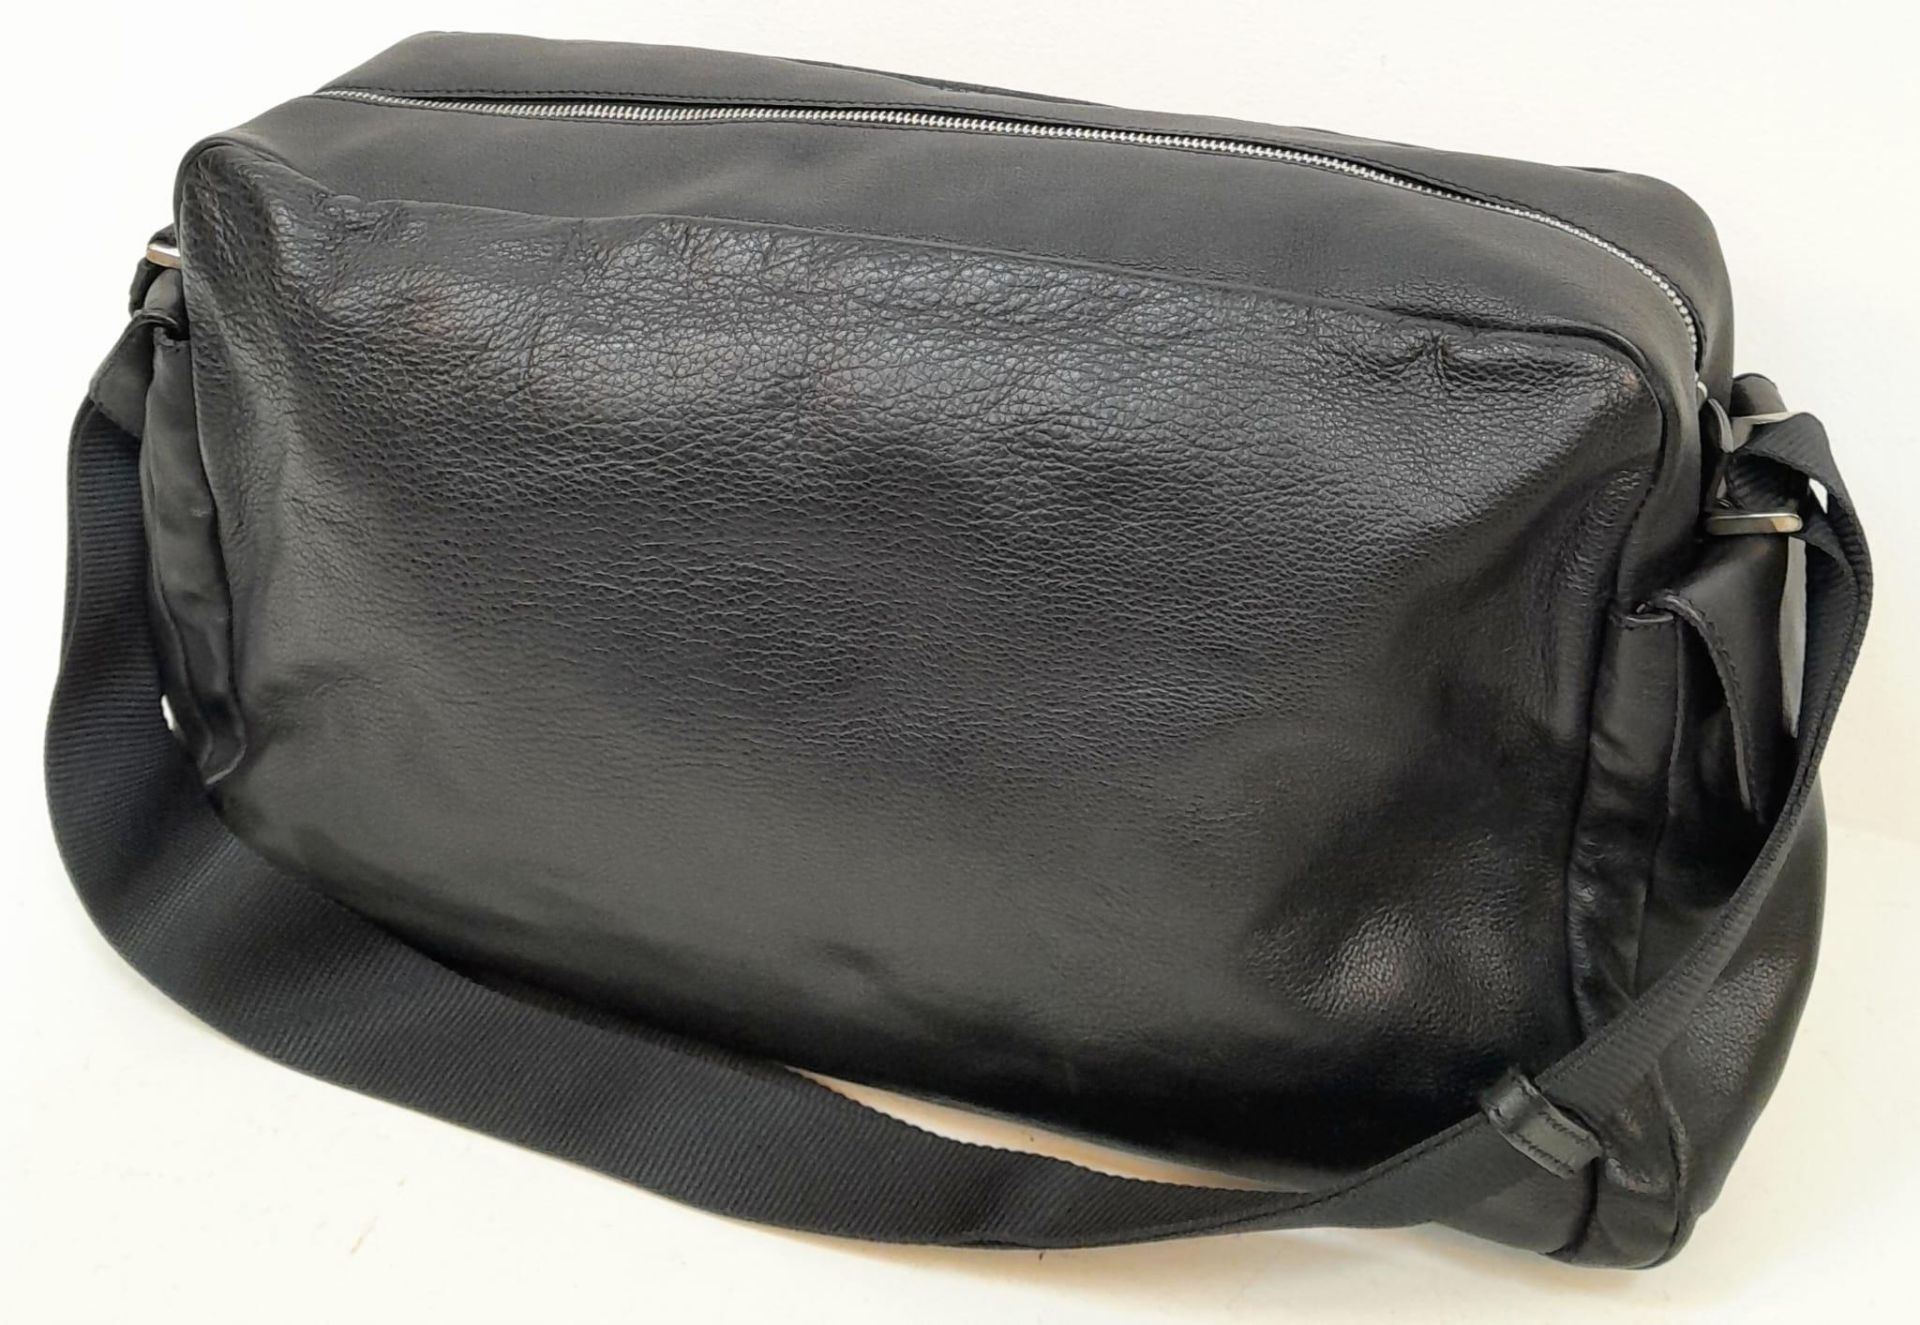 A Prada Black Duffle Bag. Leather exterior with silver-toned hardware, zipped outer compartment to - Image 3 of 12